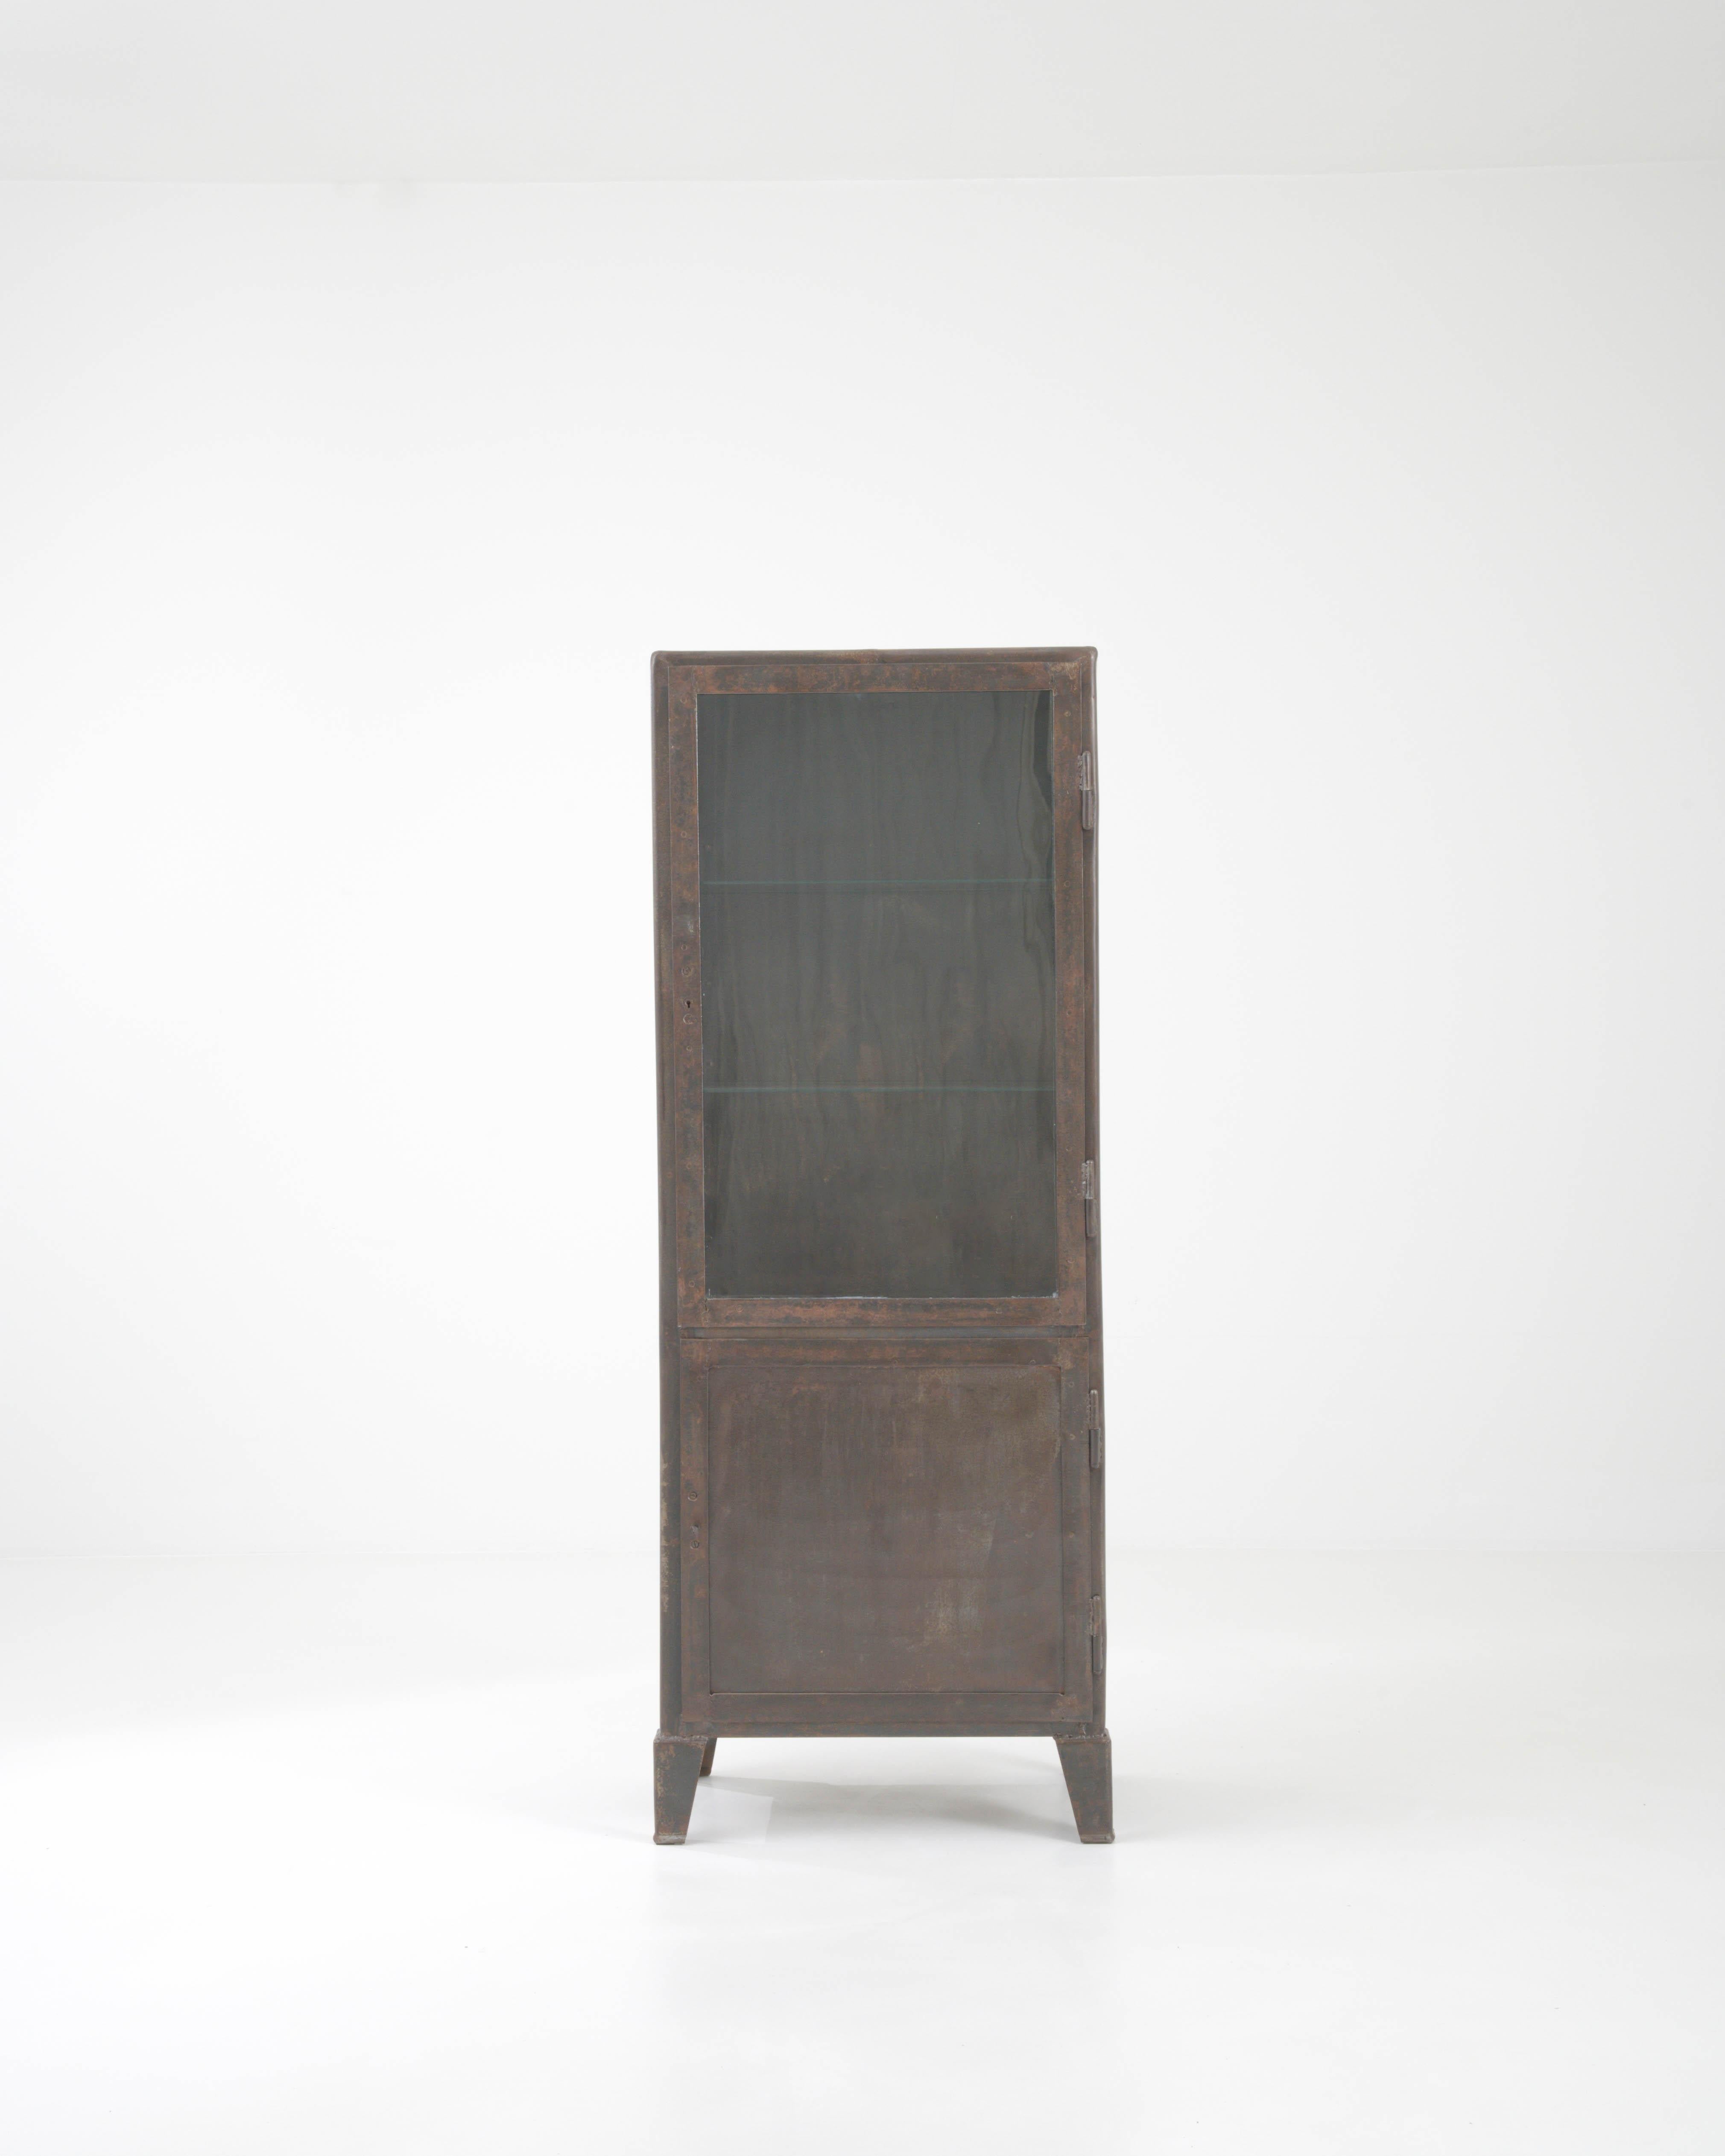 Step back in time with this early 20th-century French metal vitrine, a piece that marries industrial practicality with the grace of a bygone era. With its robust metal construction, this cabinet exudes a character of resilience and authenticity, its